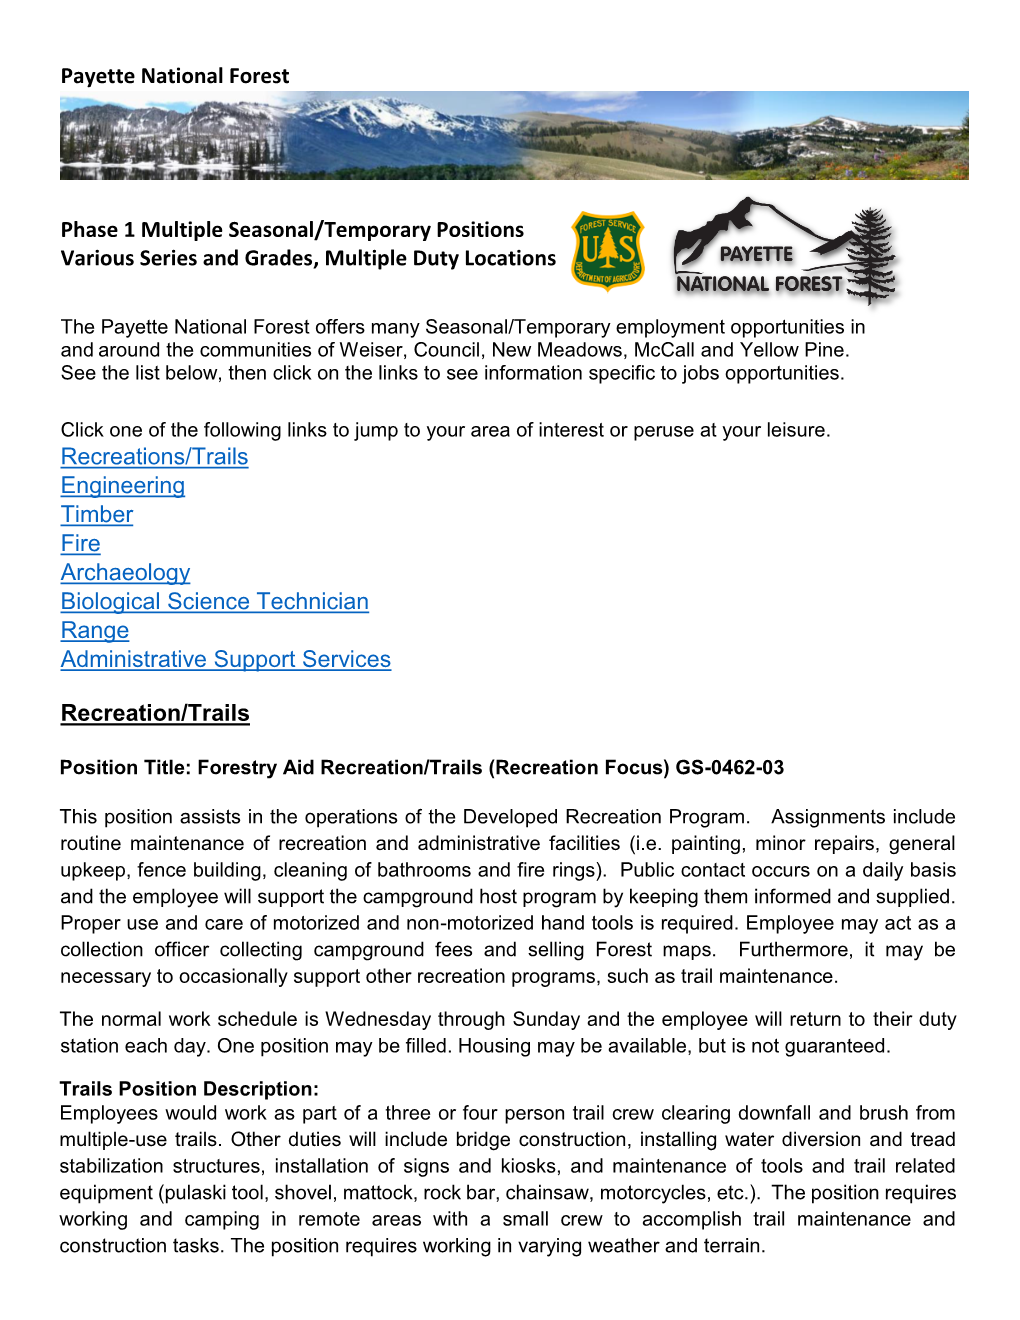 Payette National Forest Recreations/Trails Engineering